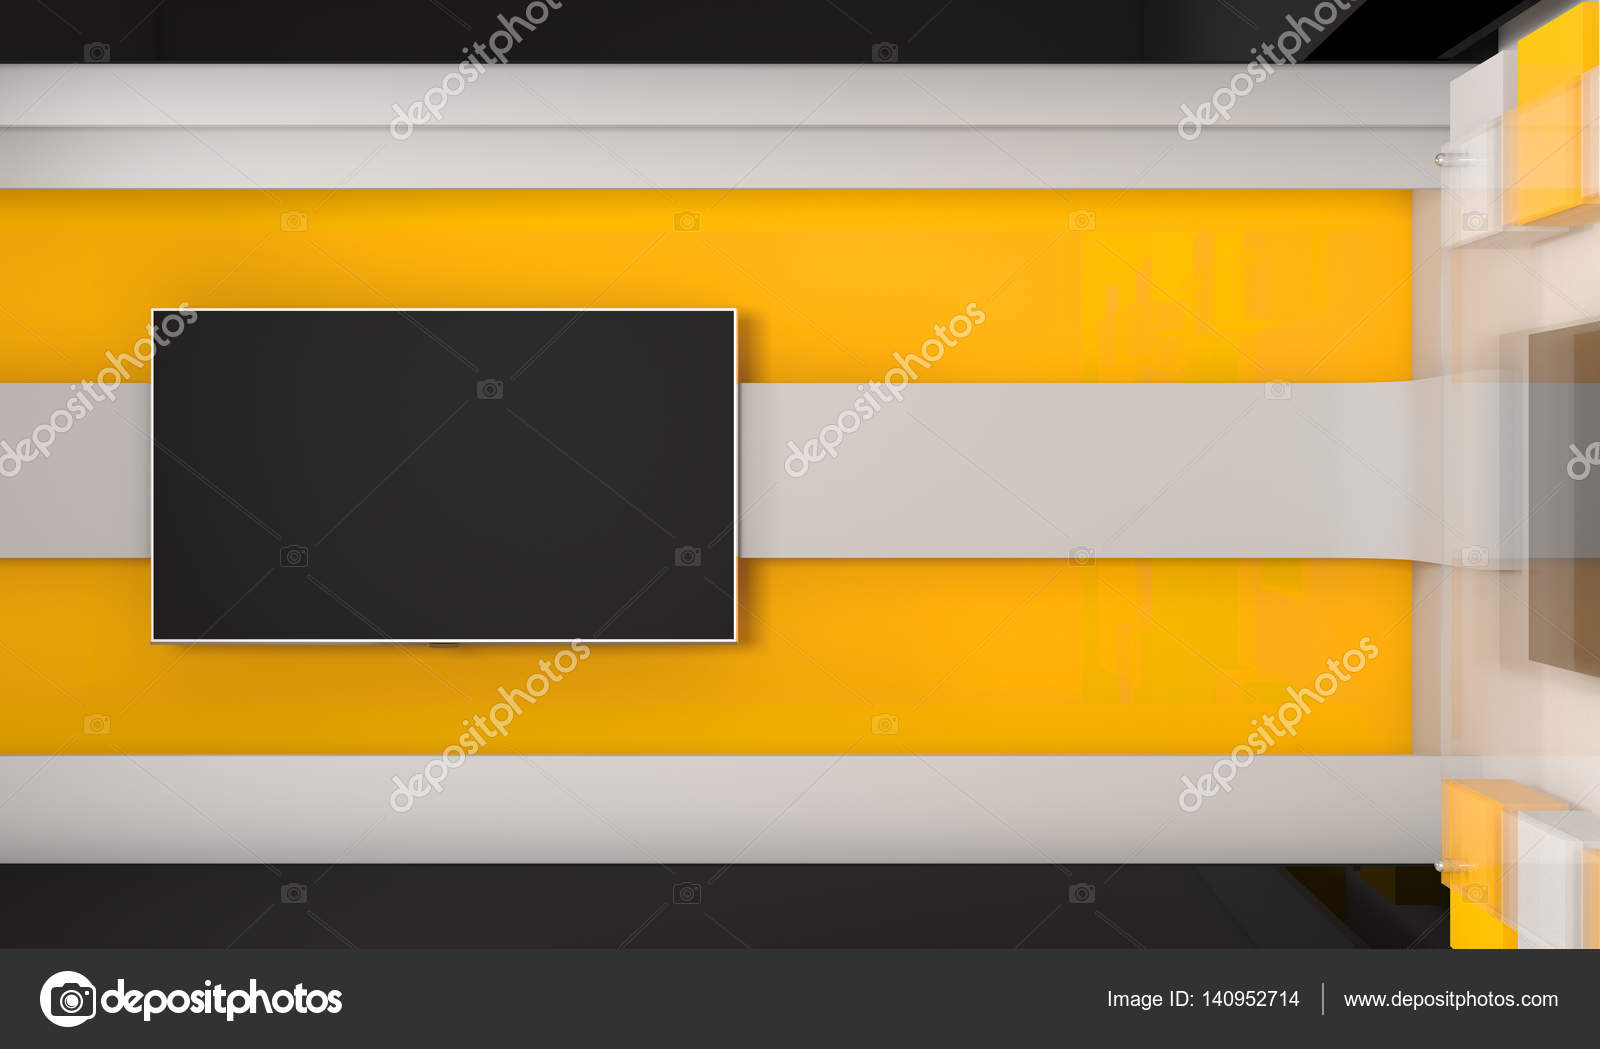 Tv Studio Backdrop For Tv Shows Tv On Wall News Studio The Perfect Backdrop For Any Green Screen Or Chroma Key Video Or Photo Production 3d Render Royalty Free Photo Stock Image